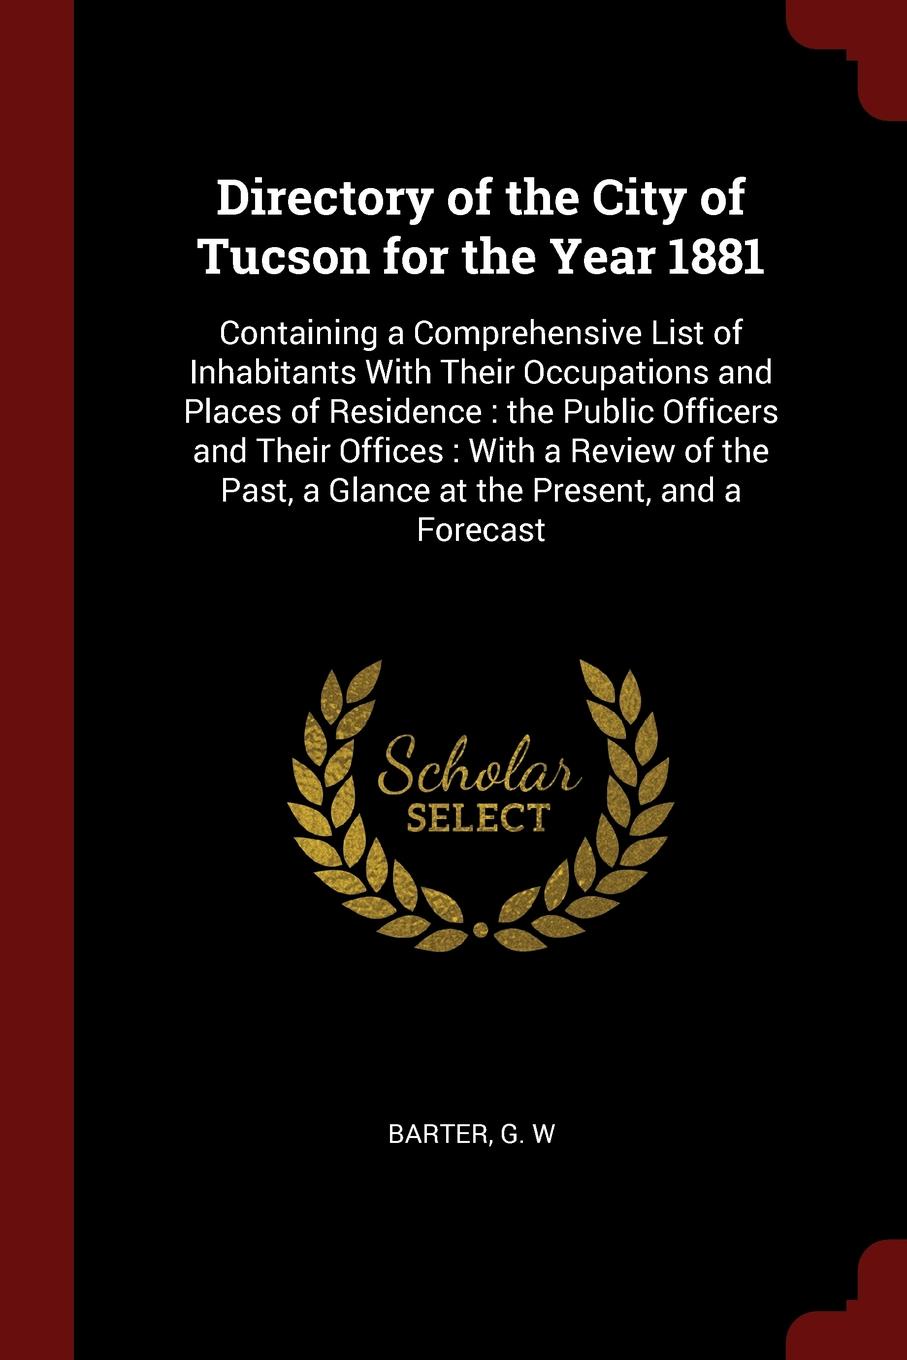 Directory of the City of Tucson for the Year 1881. Containing a Comprehensive List of Inhabitants With Their Occupations and Places of Residence : the Public Officers and Their Offices : With a Review of the Past, a Glance at the Present, and a Fo...